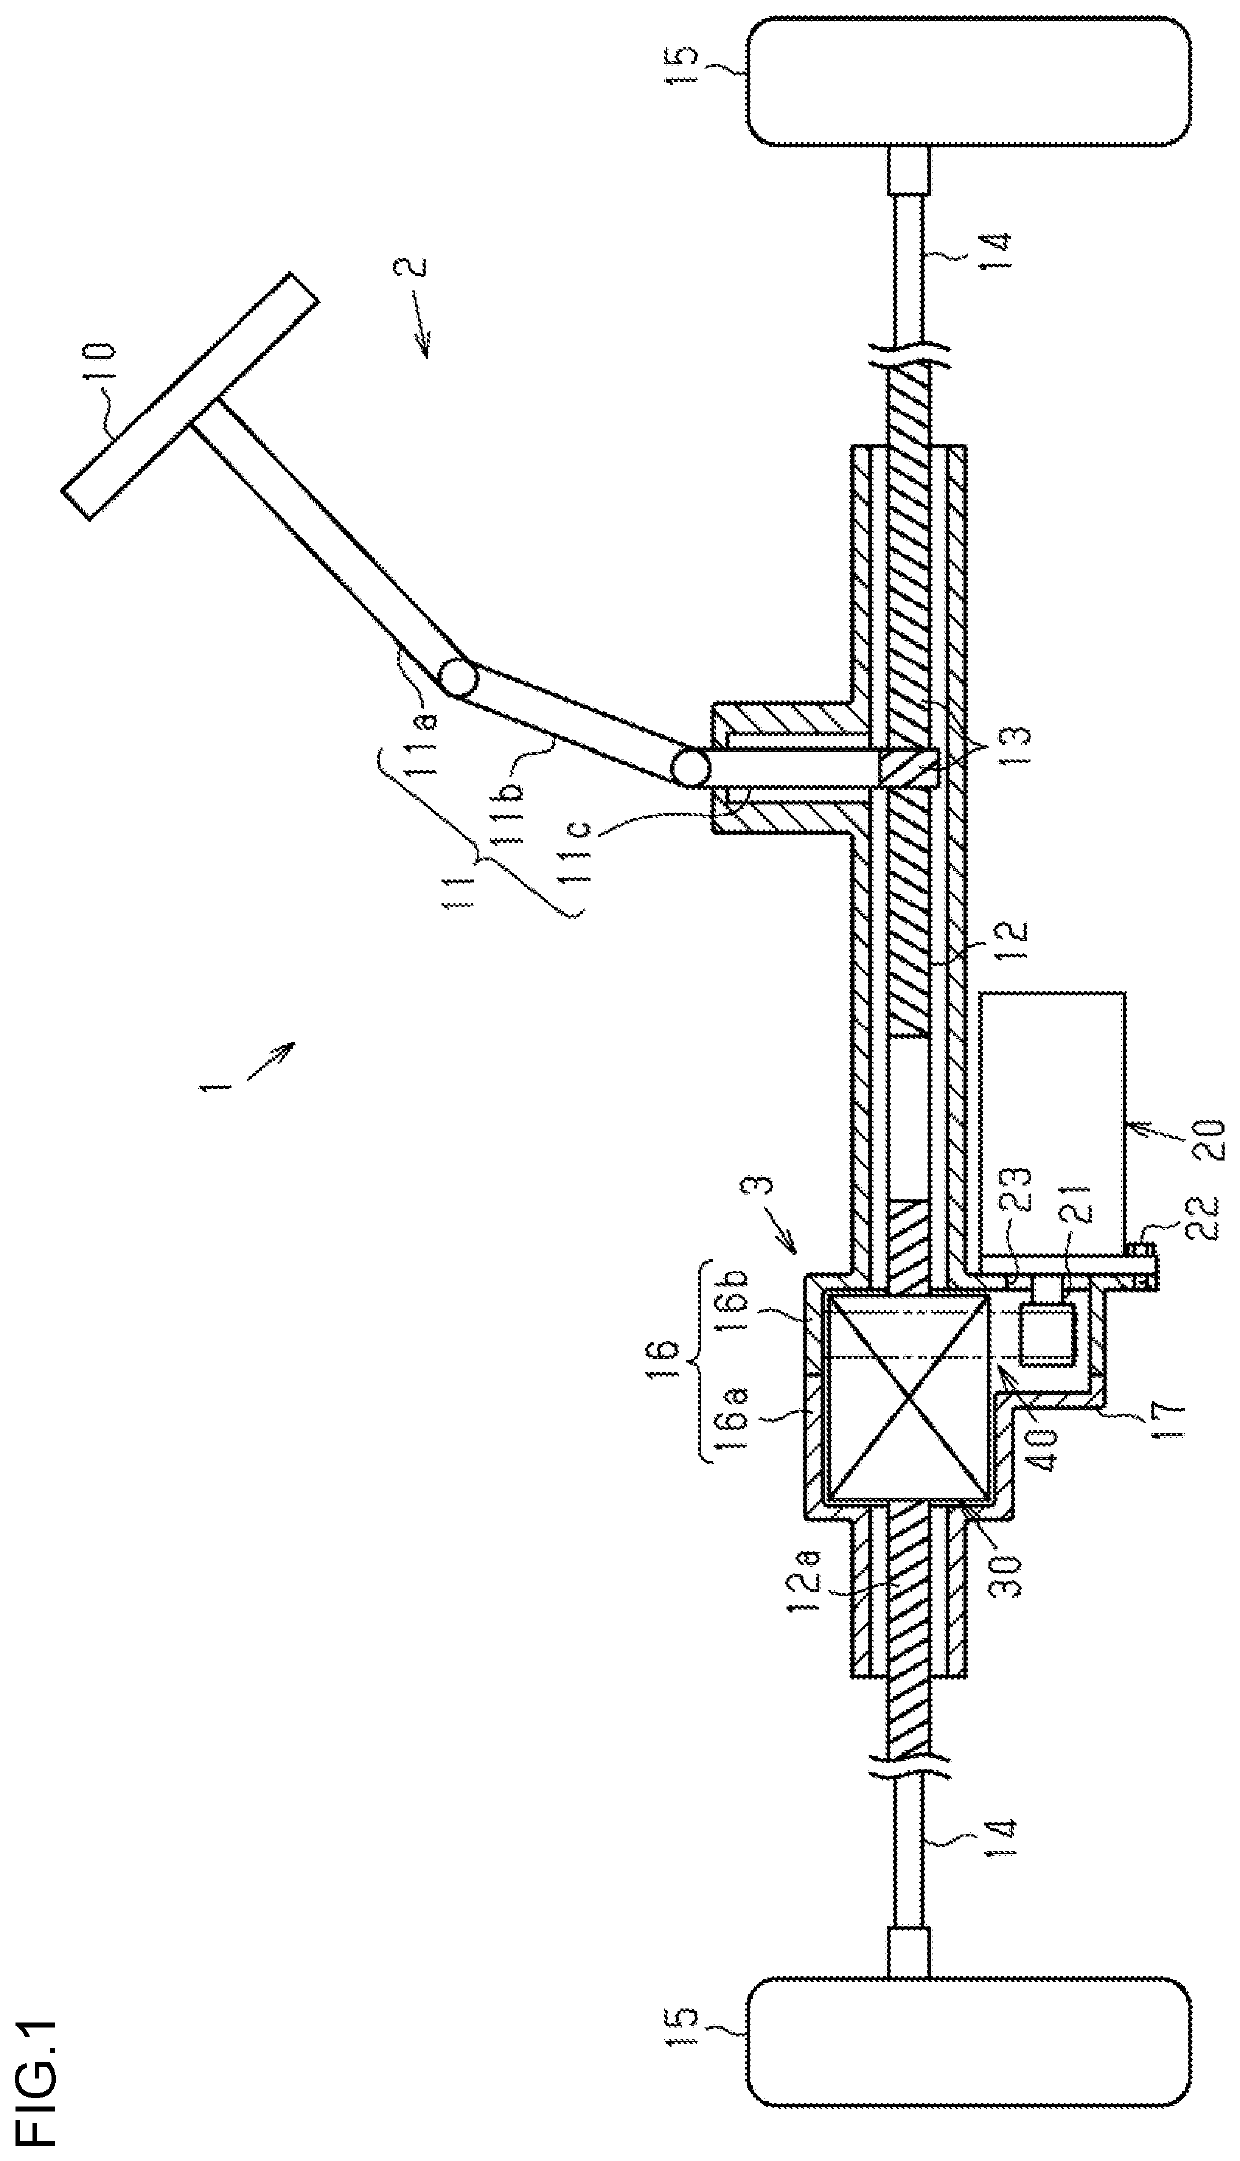 Ball screw device and steering system